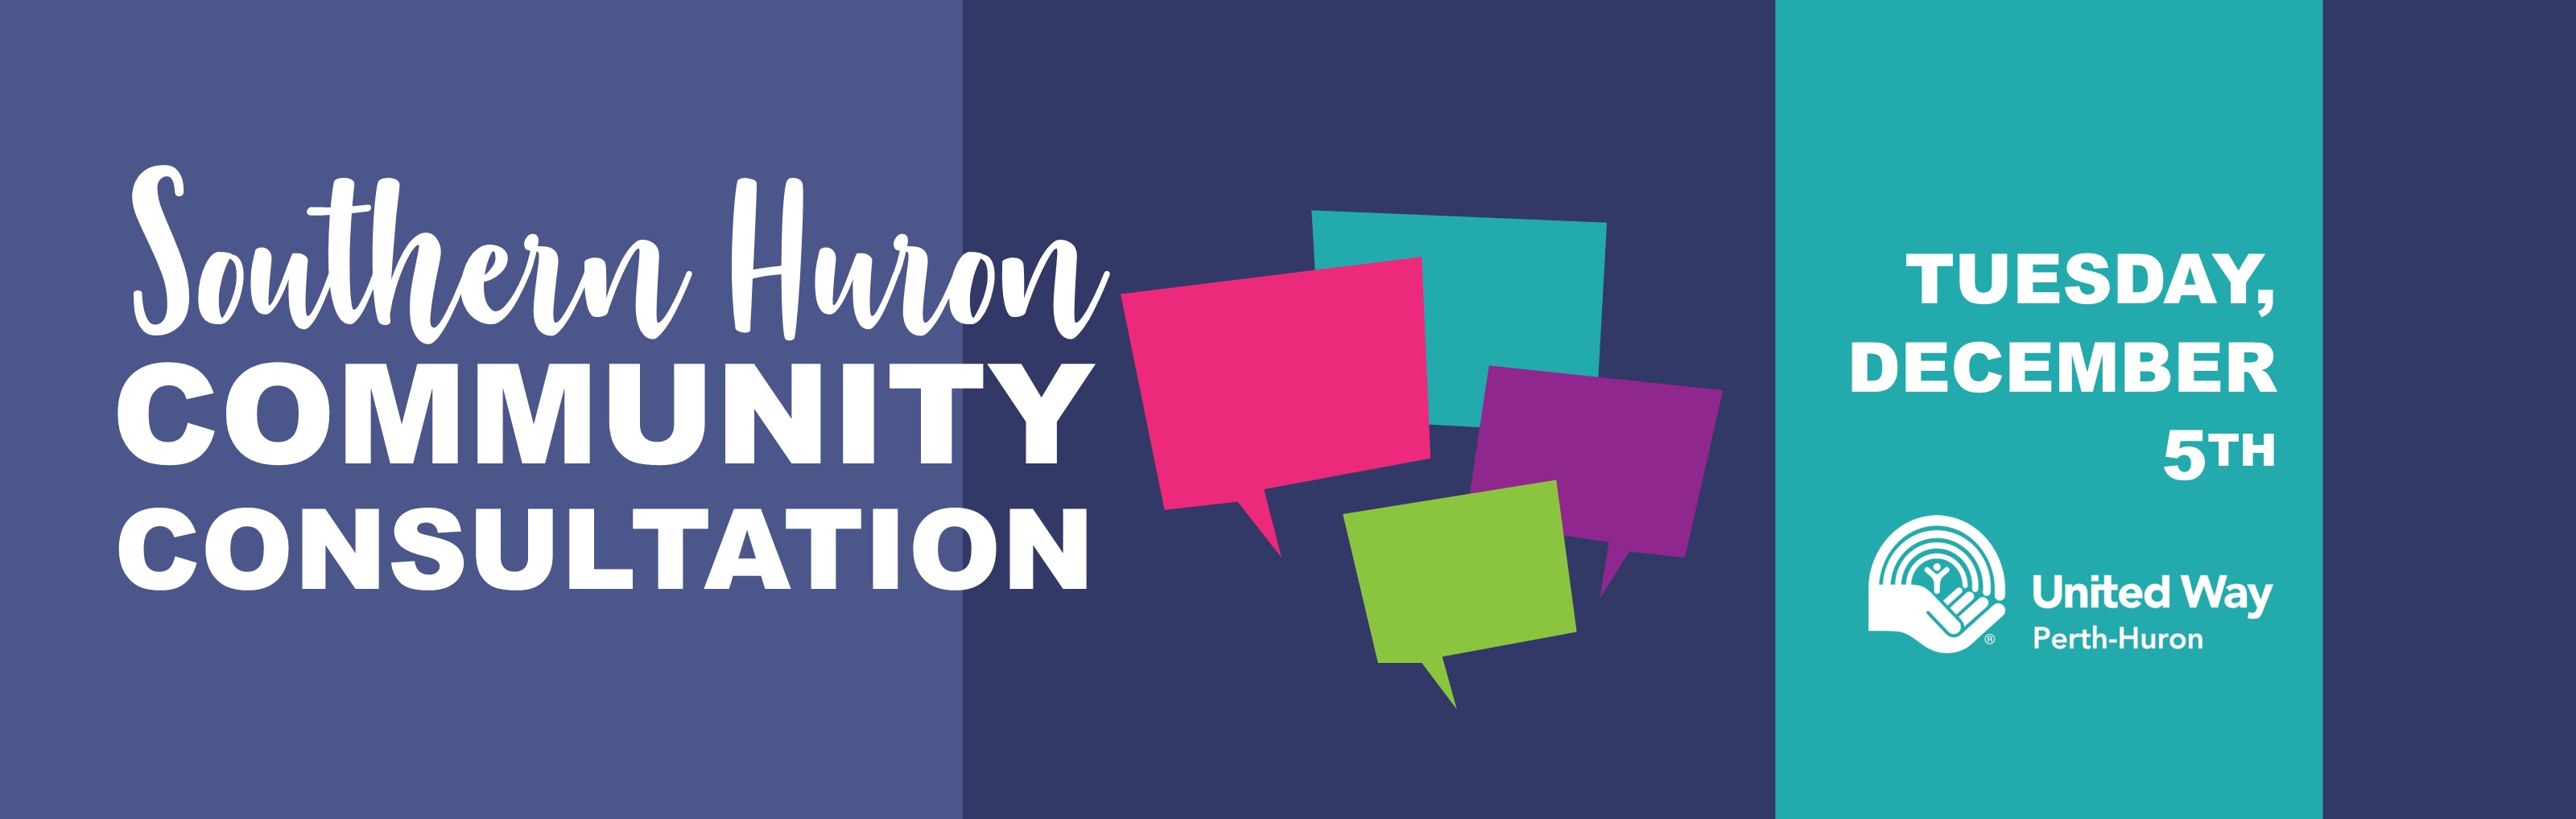 South Huron Community Consultation - We Want to Hear from You!!